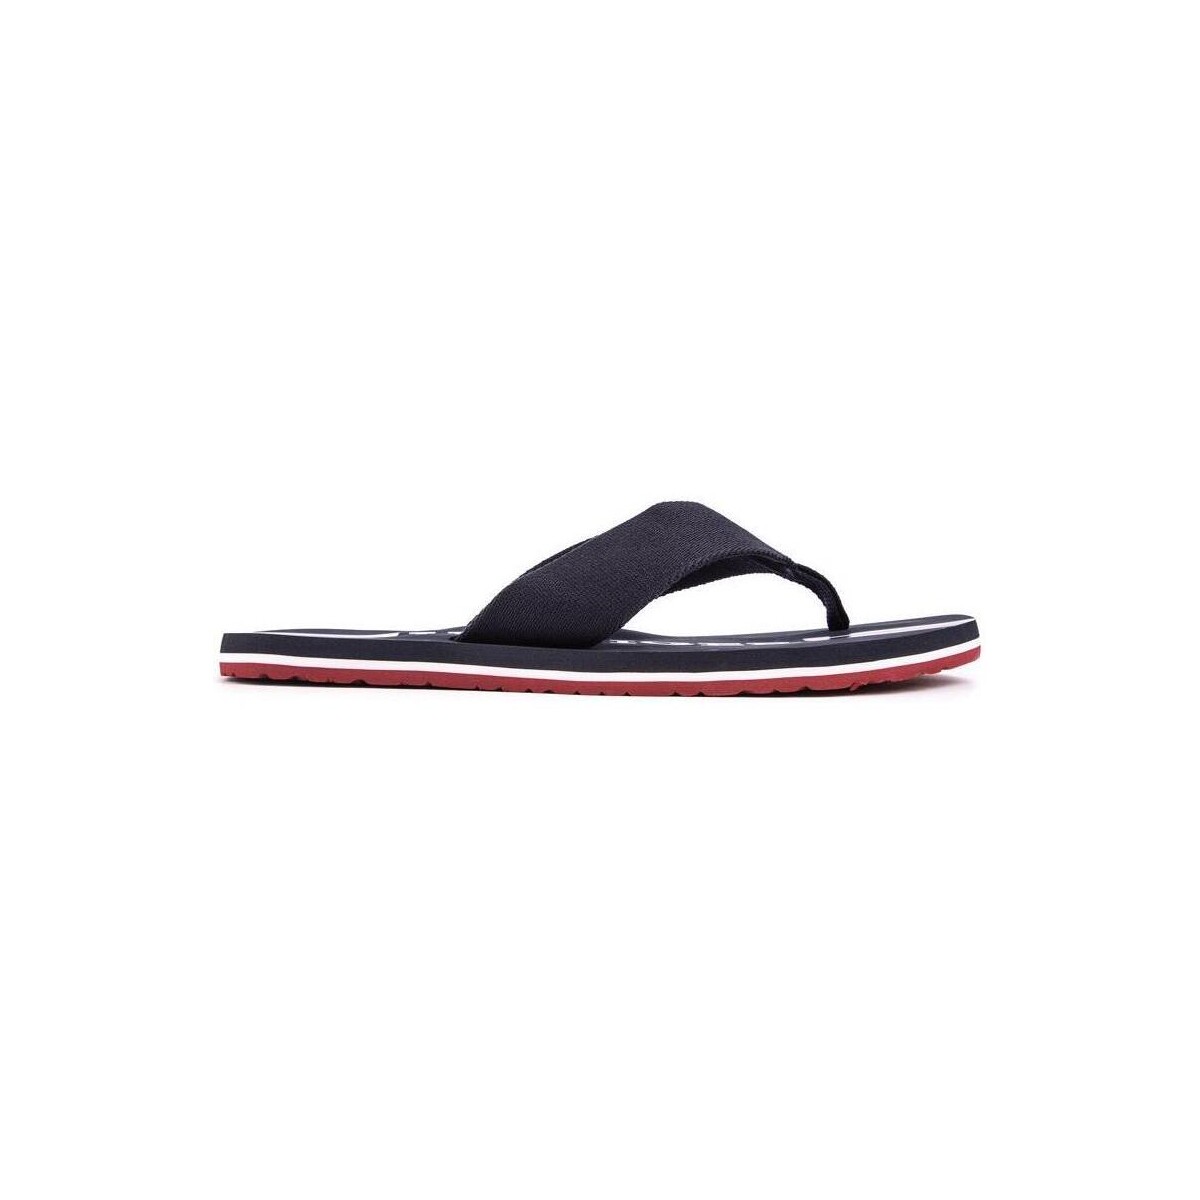 Chaussures Homme Tongs Tommy Hilfiger Beach Tongs Bleu